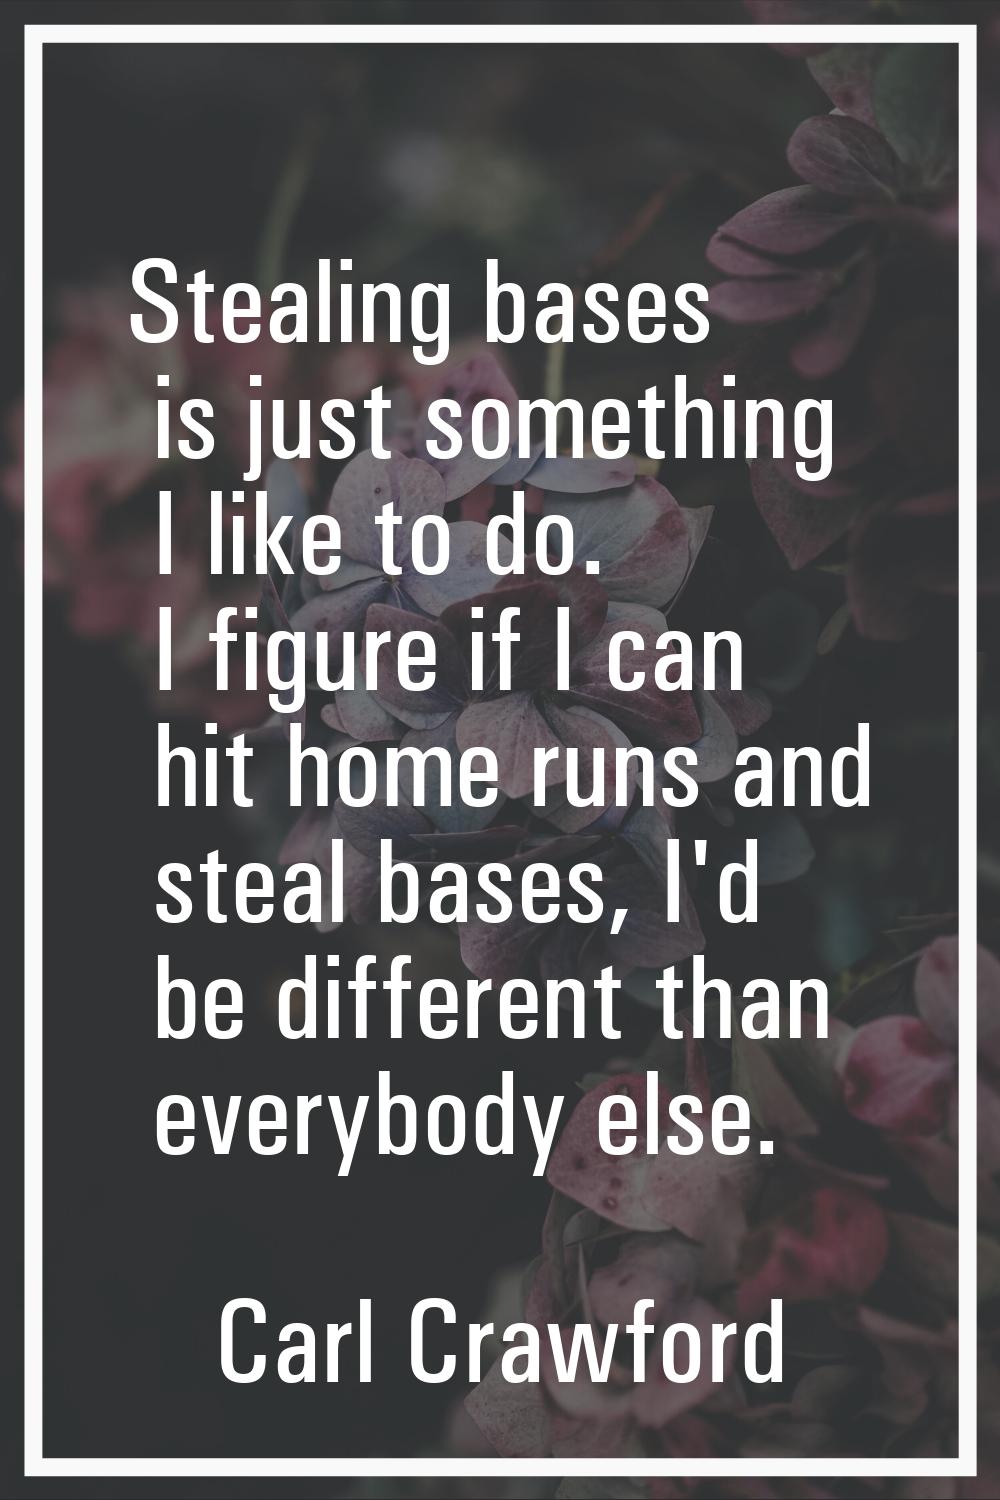 Stealing bases is just something I like to do. I figure if I can hit home runs and steal bases, I'd